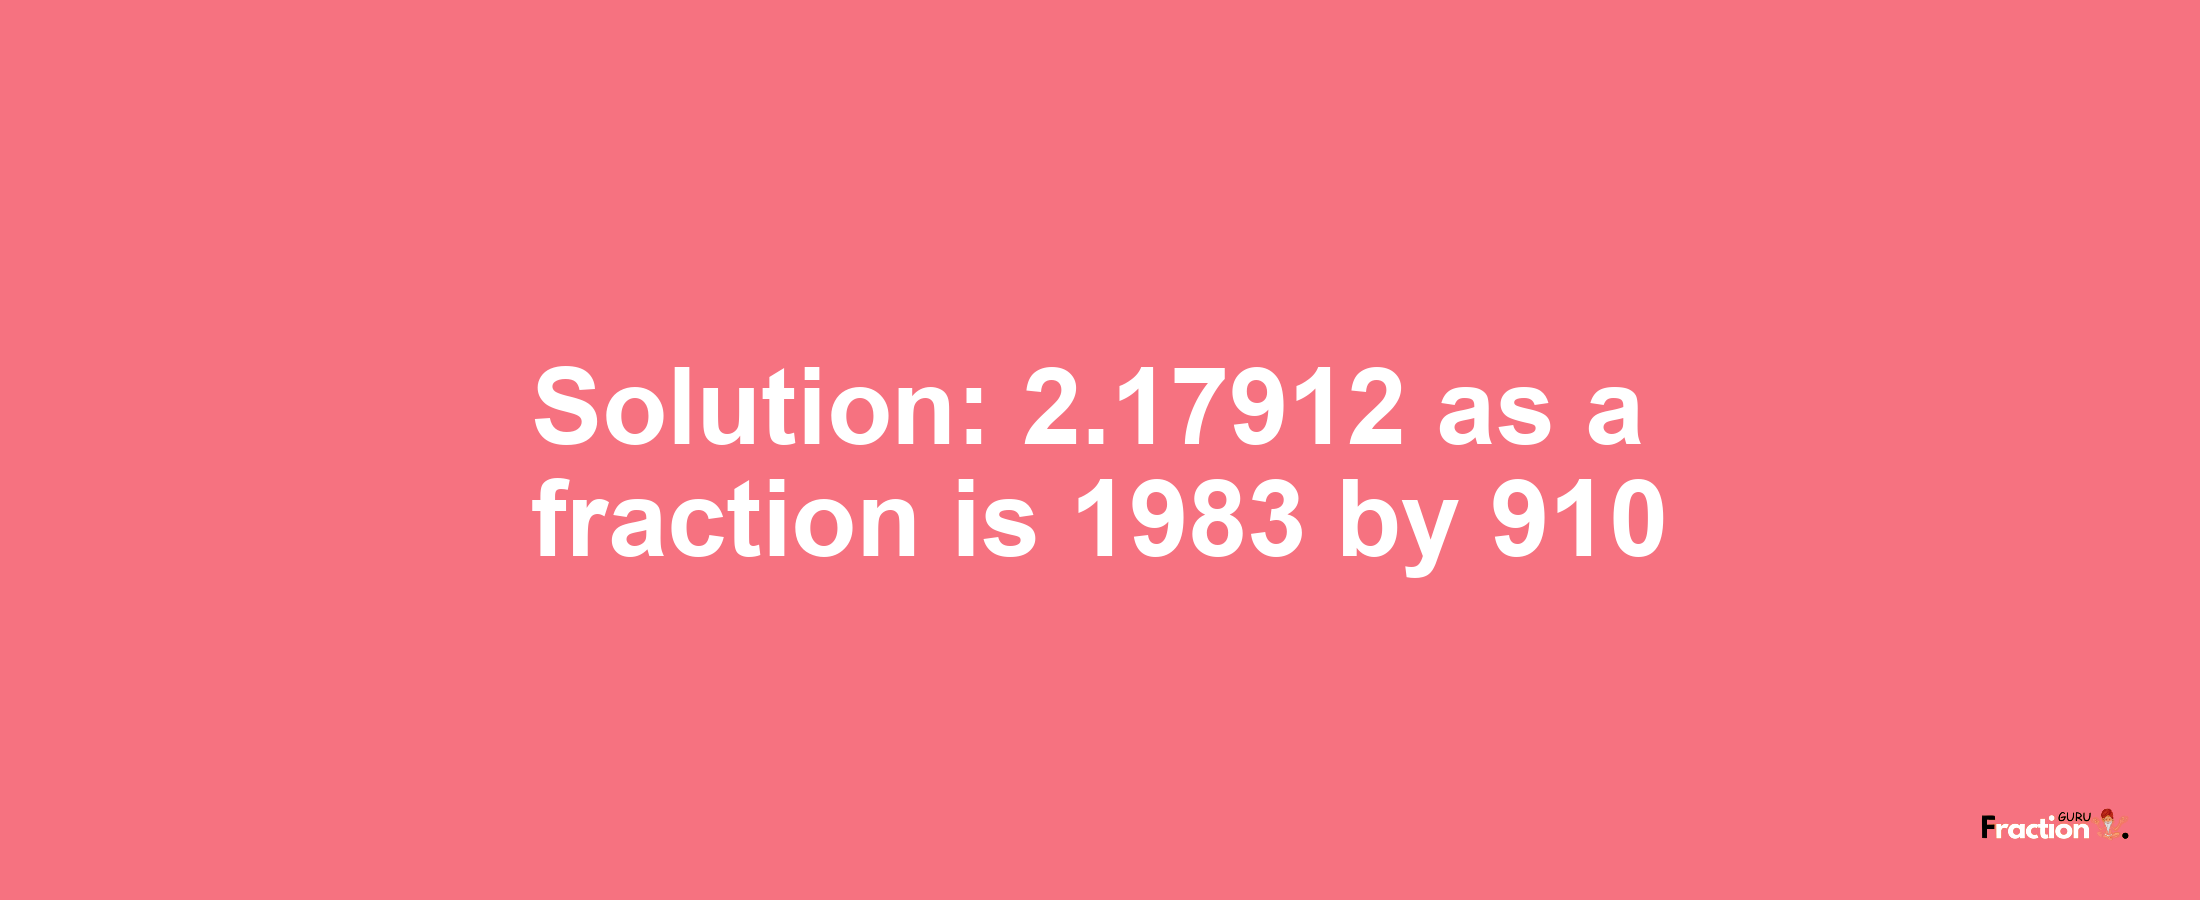 Solution:2.17912 as a fraction is 1983/910